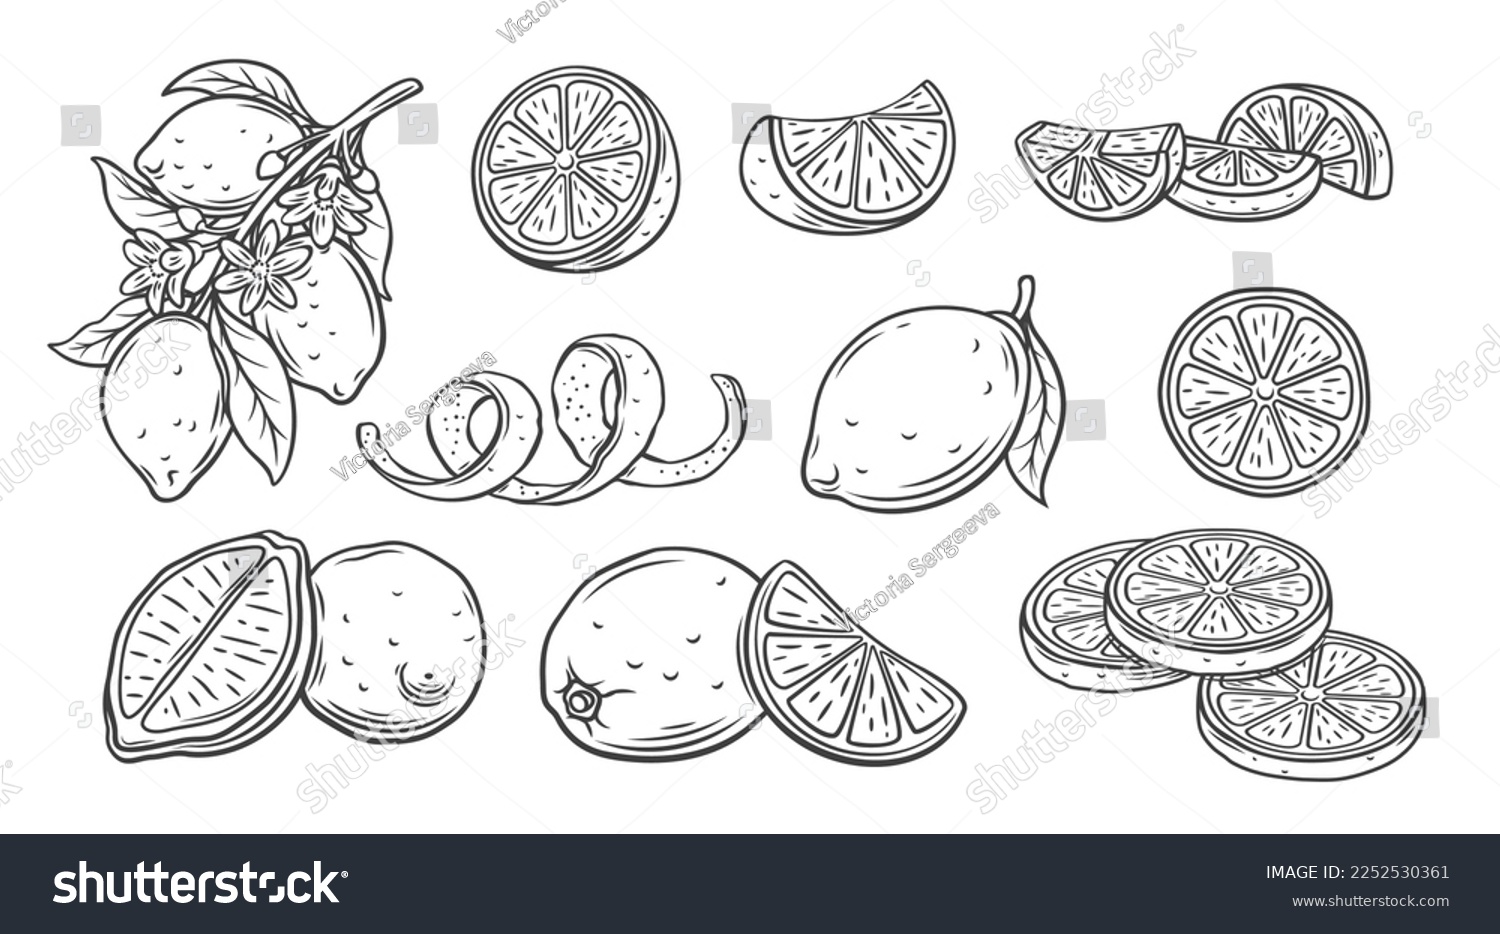 Lemon line icons set vector illustration. Hand drawn outline whole citrus with peel and natural fruit cut into different pieces and circle slices, twists of lemon zest and branch of blossom and leaves #2252530361